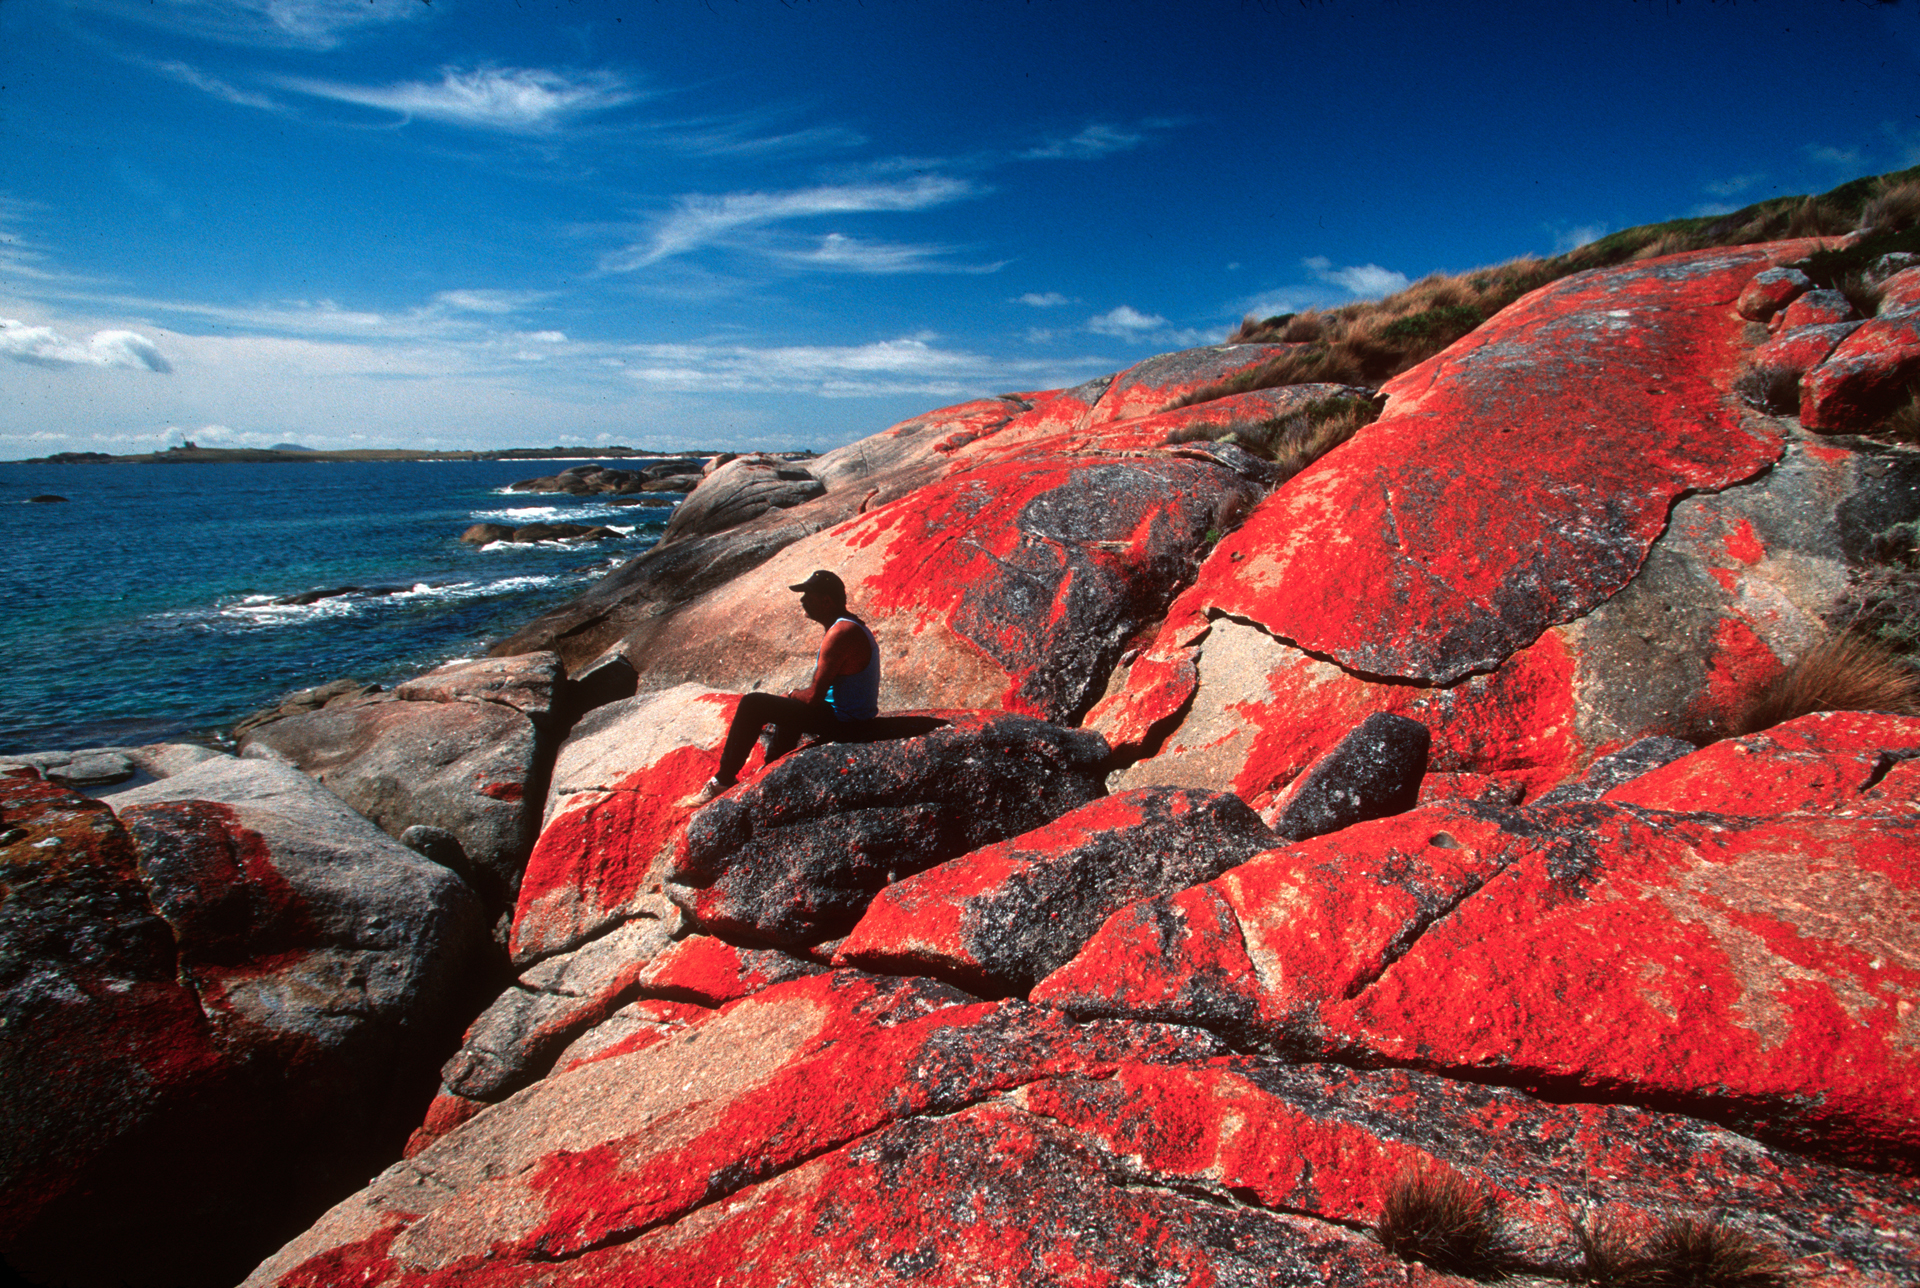  An aborigine inhabitant of ‘The Corner’ relaxes on a coastal rock covered by blooming lichen.  Cape Barren Island  